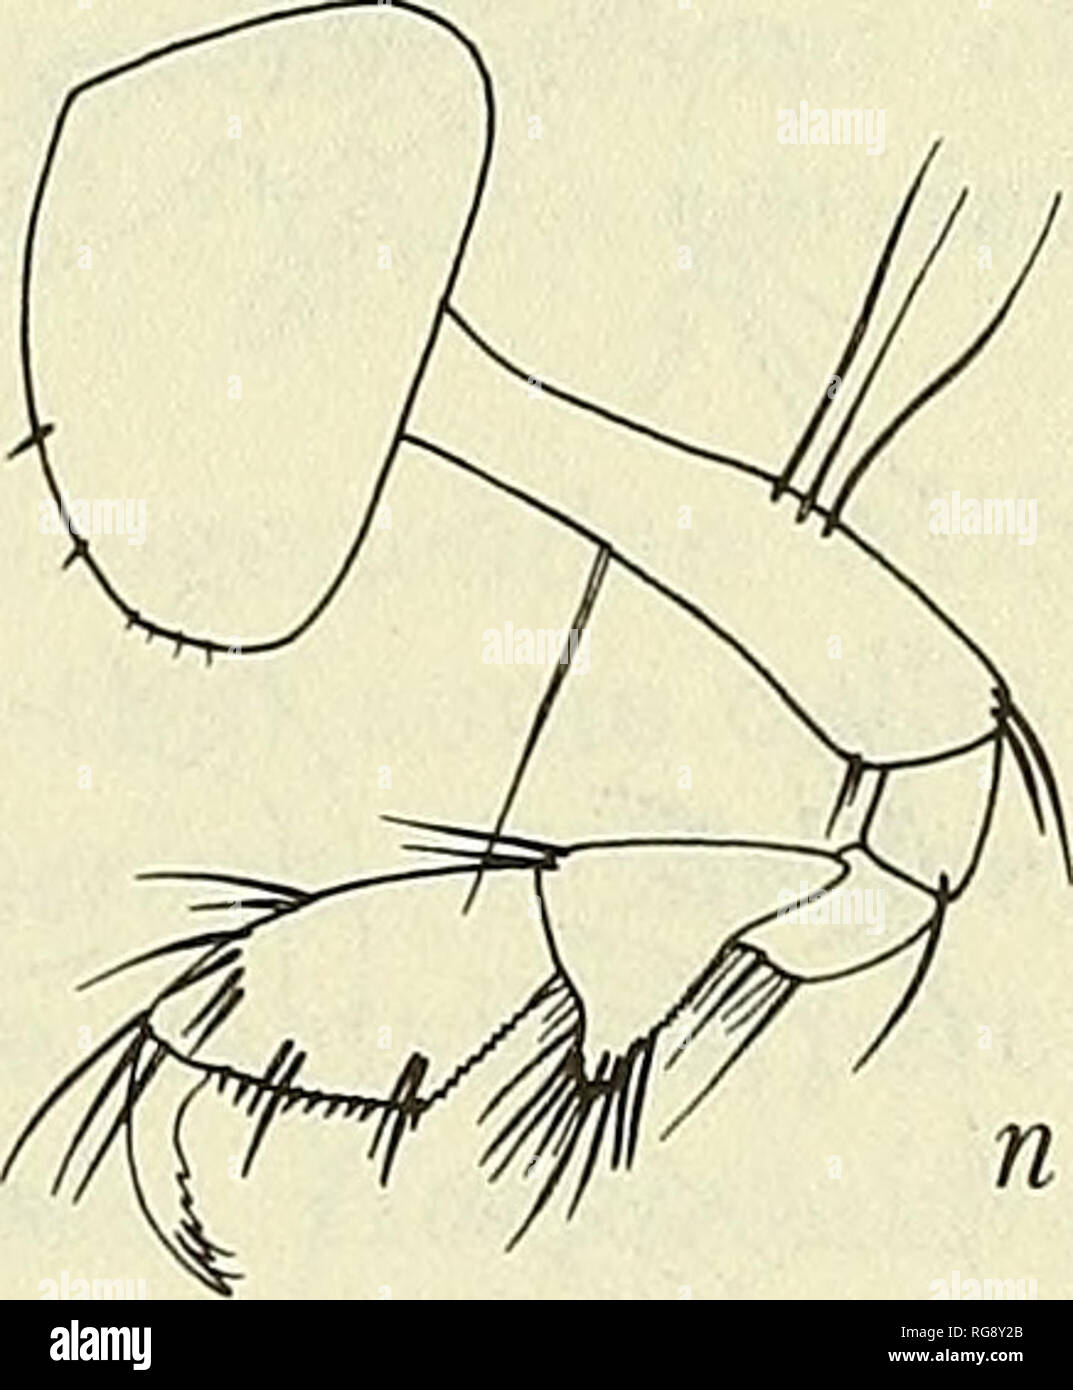 . Bulletin - United States National Museum. Science. Figure 69.—Bateidae (all figures after Shoemaker, 1926): a, Carinohatea cuspidata Shoe- maker. Head: b, Batea catharinensisy[A&amp;Y. Mandible: c, Batea catharinensis. Lower lip: d, Carinohatea; e, Batea. Mouthparts, Batea: /, maxilla 1; g, maxilla 2; h, maxilliped. Gnathopod 1: i, Batea. Telson: ;&quot;, Batea transversa; k, Batea rectangulata; I, Batea catharinensis. Uropod 3: m, Batea catharinensis. Gnathopod 2: n, Batea catharinensis.. Please note that these images are extracted from scanned page images that may have been digitally enh Stock Photo